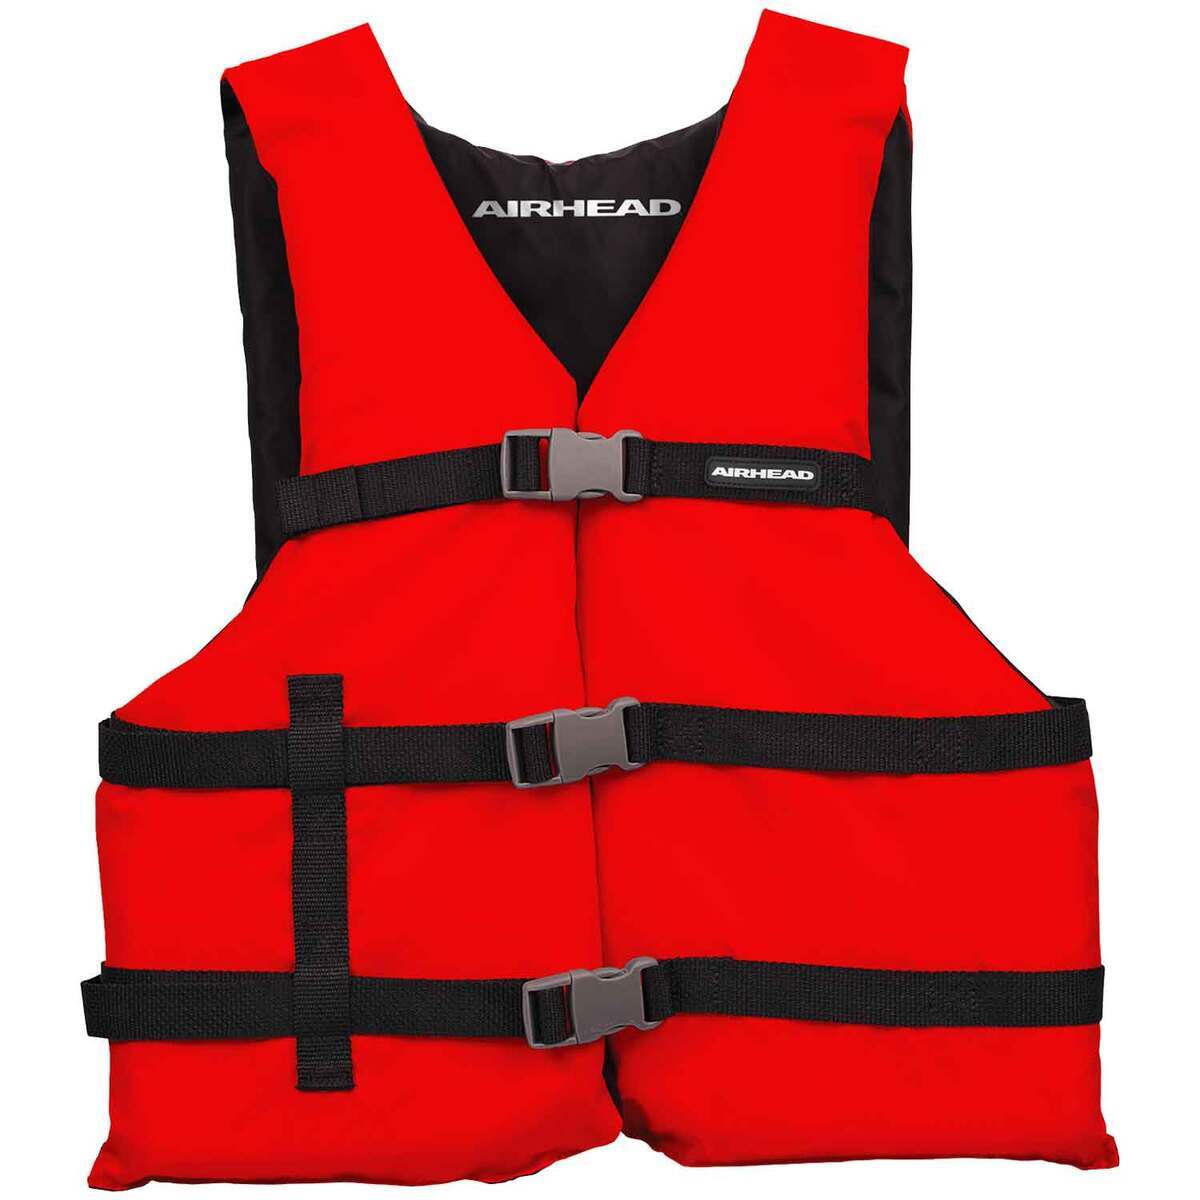 Airhead General Boating Life Jacket - Adult 4 Pack | Sportsman's Warehouse